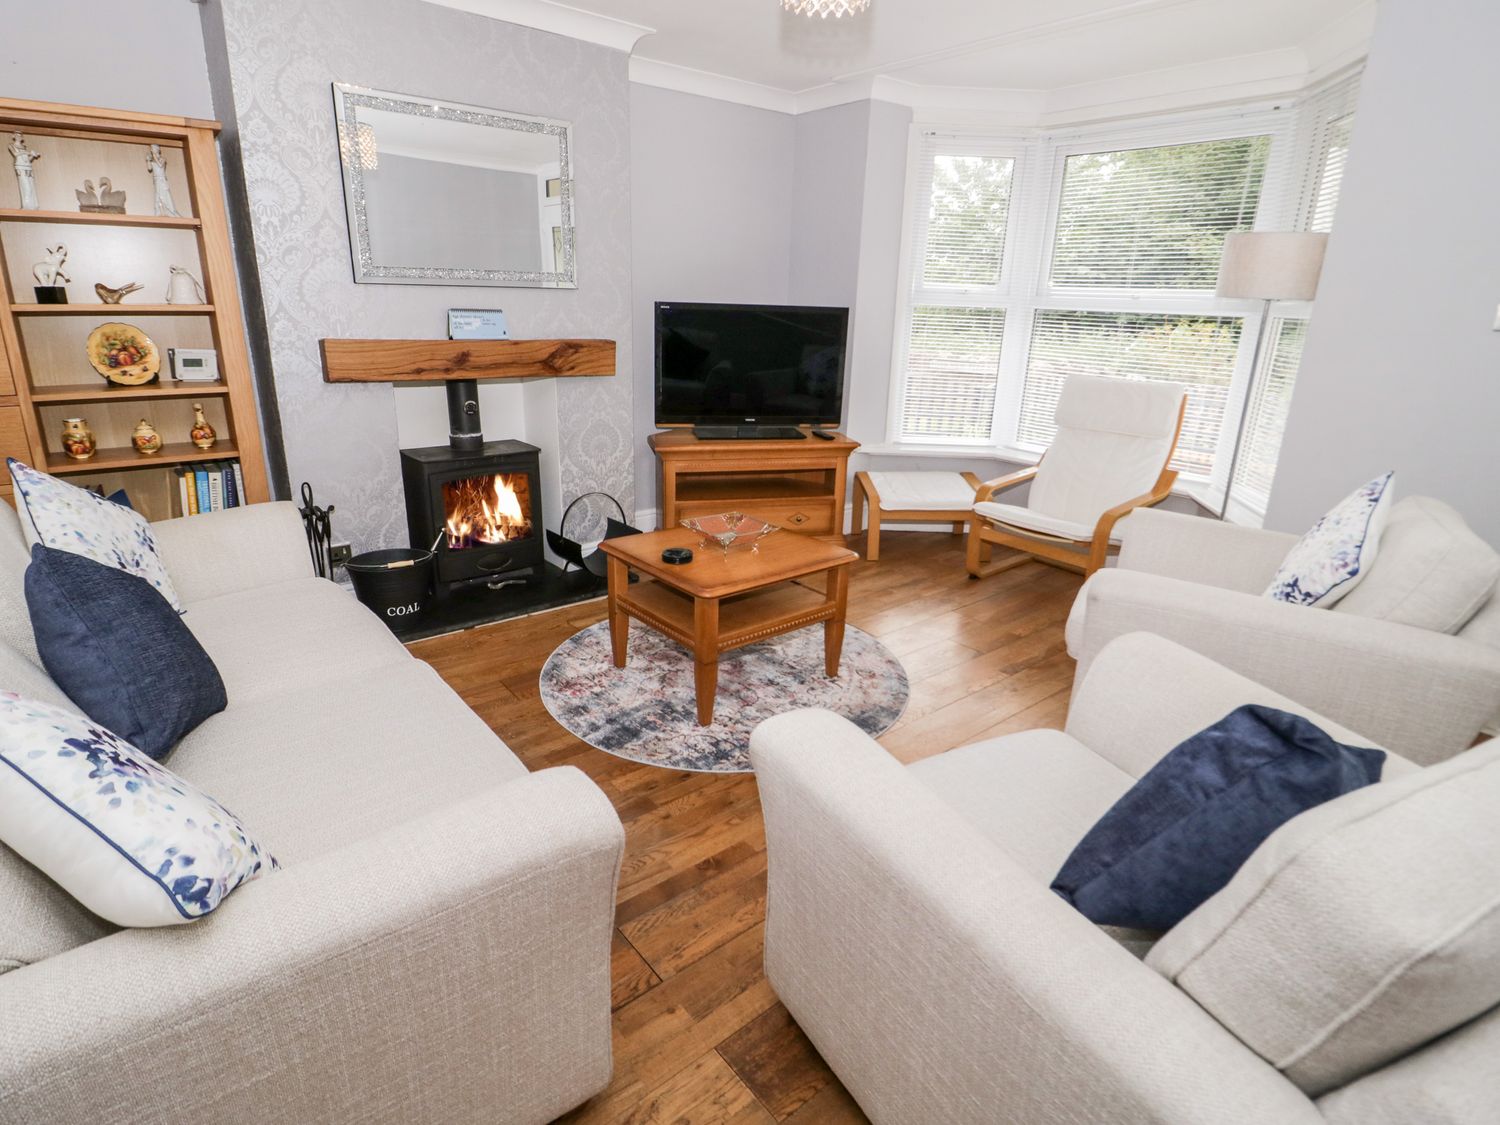 1 River View Terrace - North Wales - 1132497 - photo 1